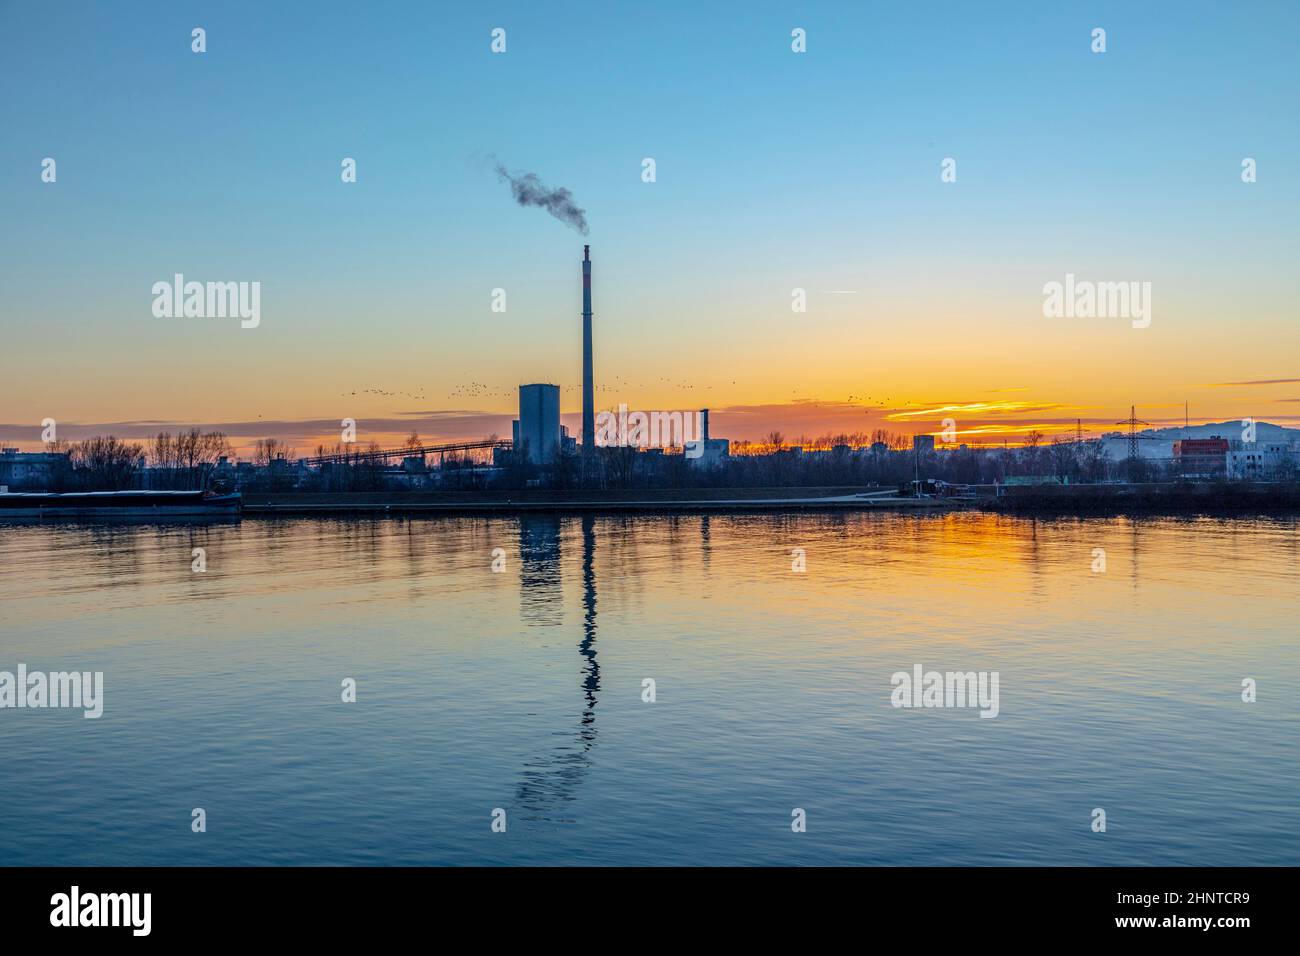 industry at river Danube in Linz, Austria in sunset with smog Stock Photo